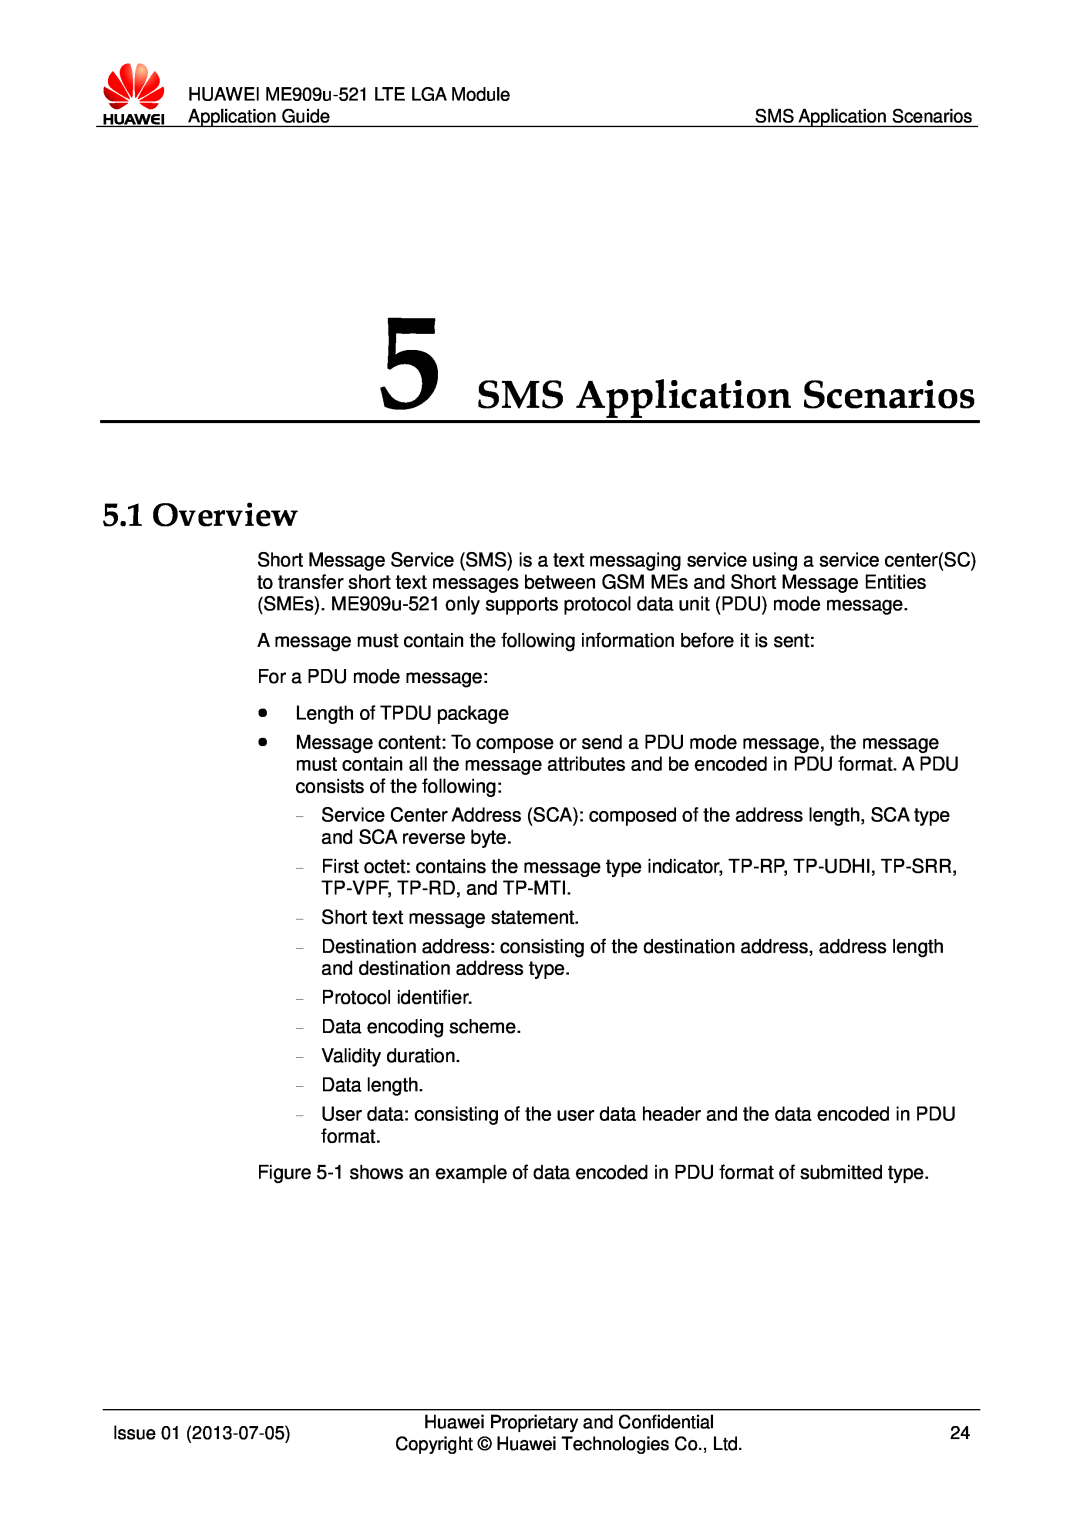 Huawei ME909u-521 manual SMS Application Scenarios, Overview 